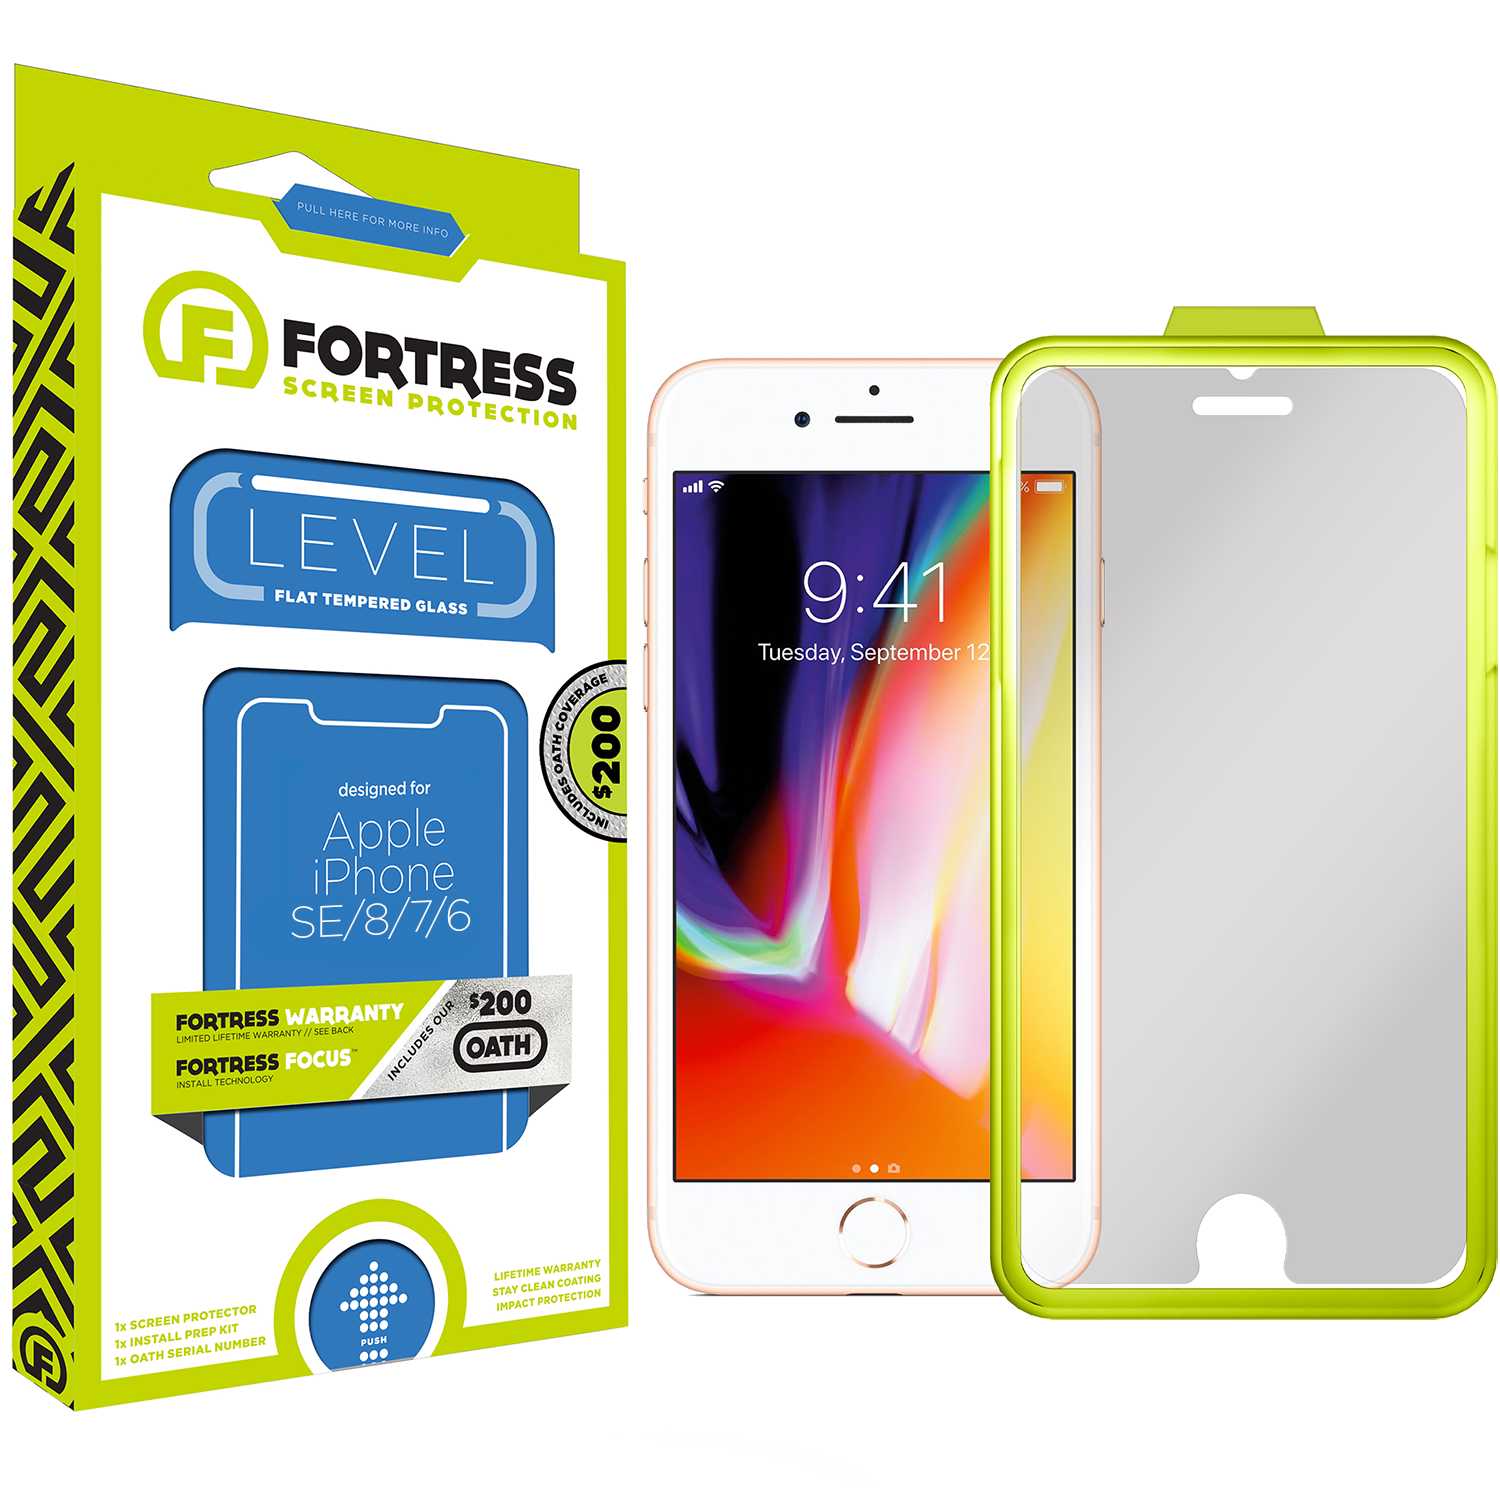 Fortress iPhone SE/8/7 Screen Protector $200CoverageInstallTool Scooch Screen Protector